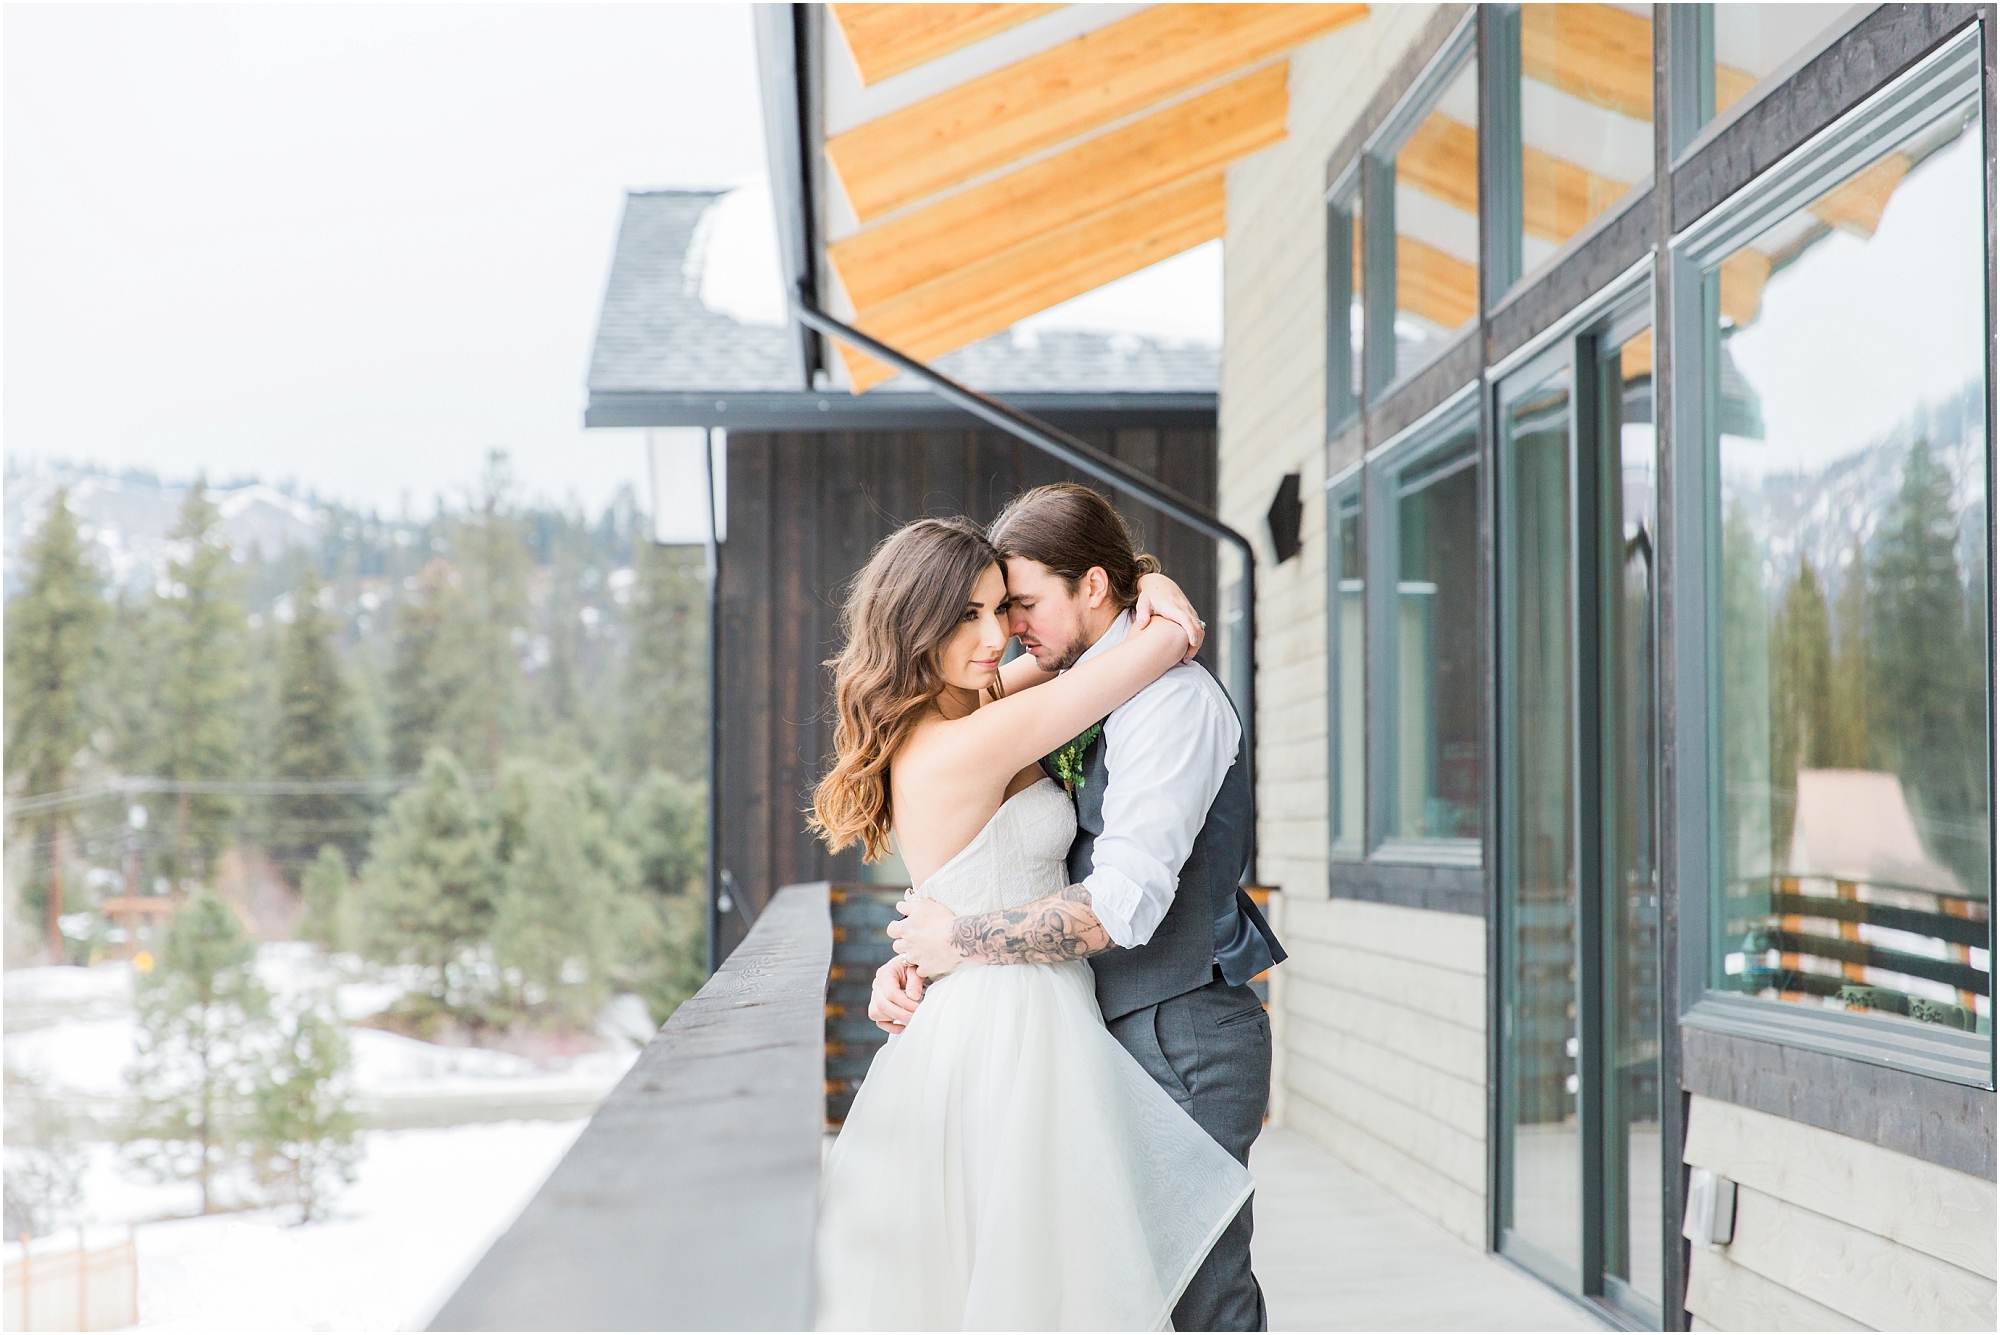 Outdoor winter wedding styled shoot in Leavenworth, WA by Erica Swantek Photography. 